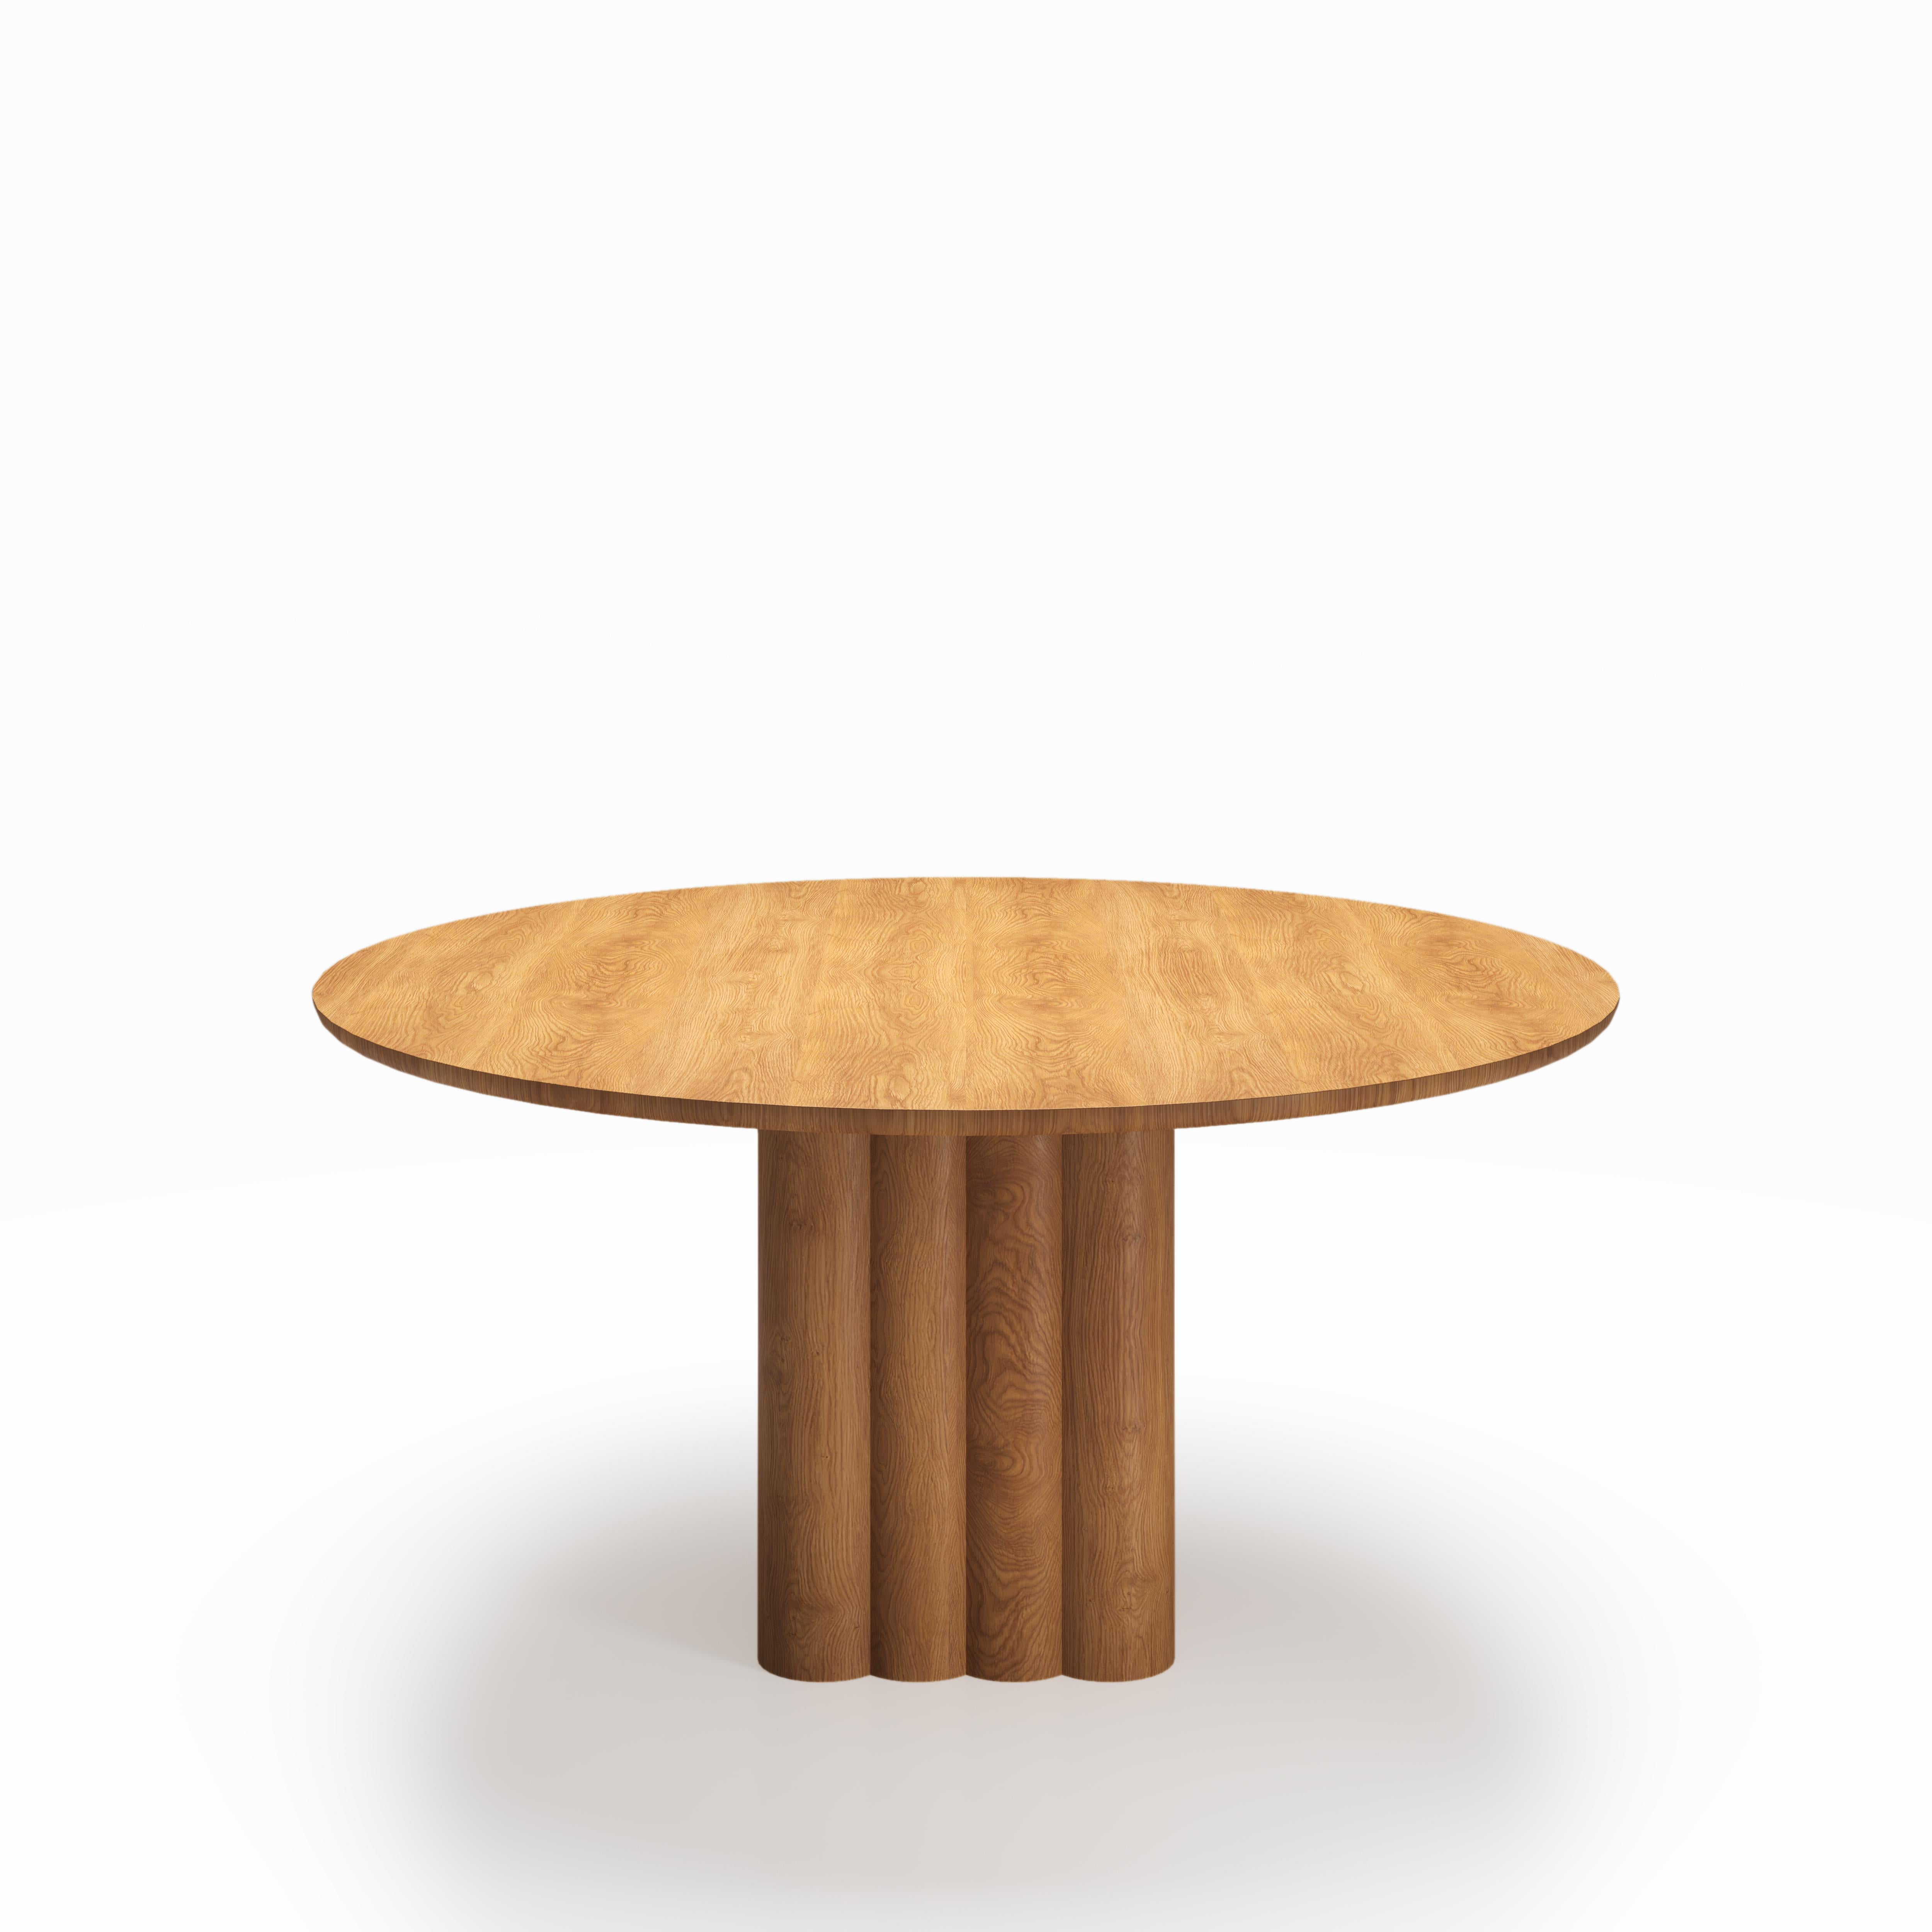 Danish Round Dining Table 'Plush' by Dk3, Natural Oak, 160 cm For Sale